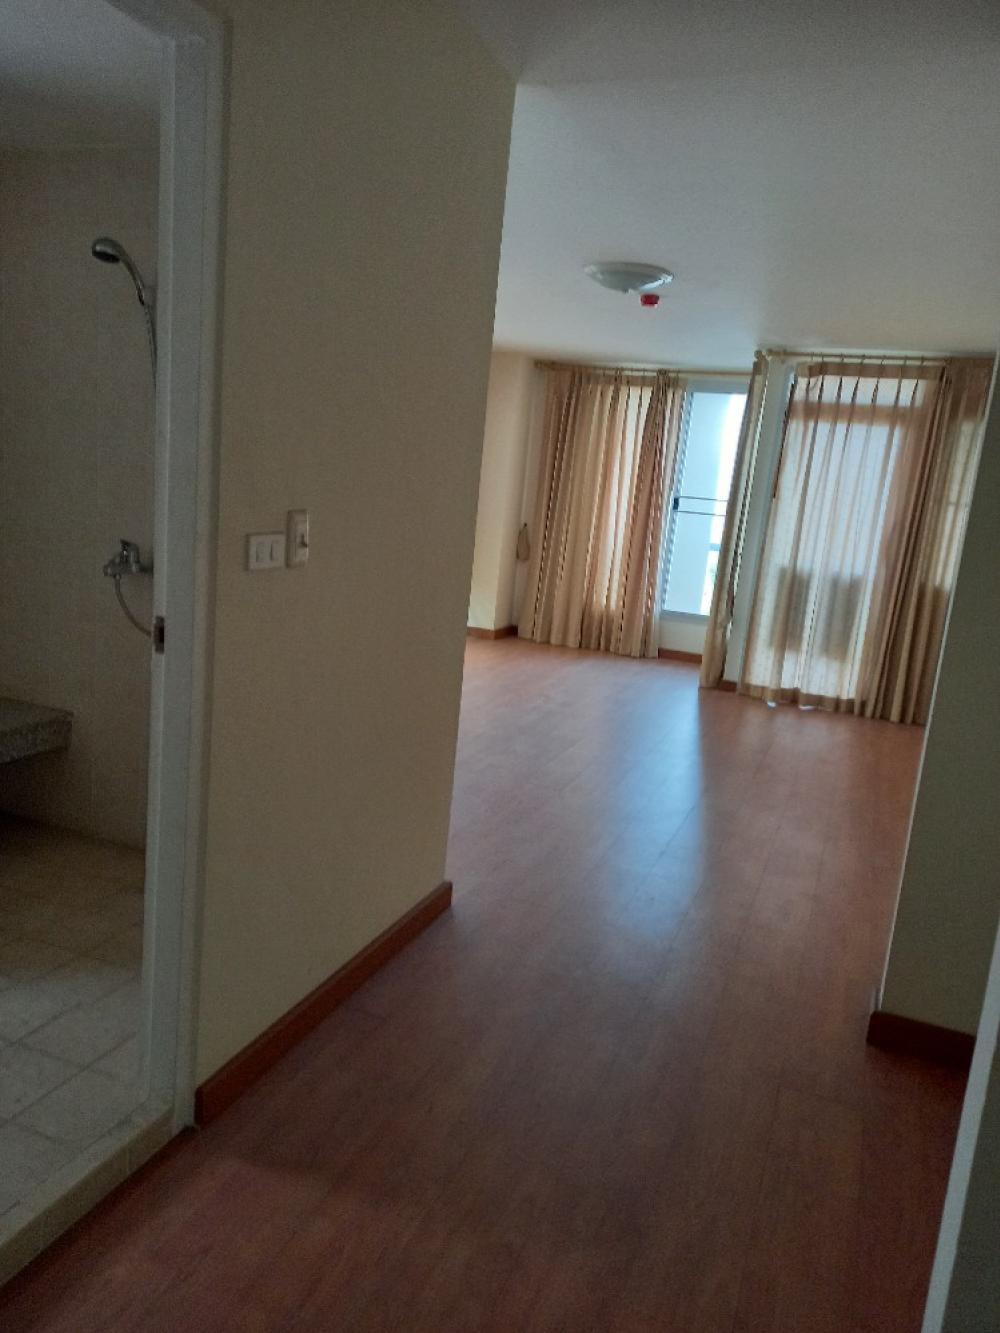 For SaleCondoBangna, Bearing, Lasalle : (Owner) Studio condo for sale Very new condition (never lived in), corner room, good view, wooden floor.